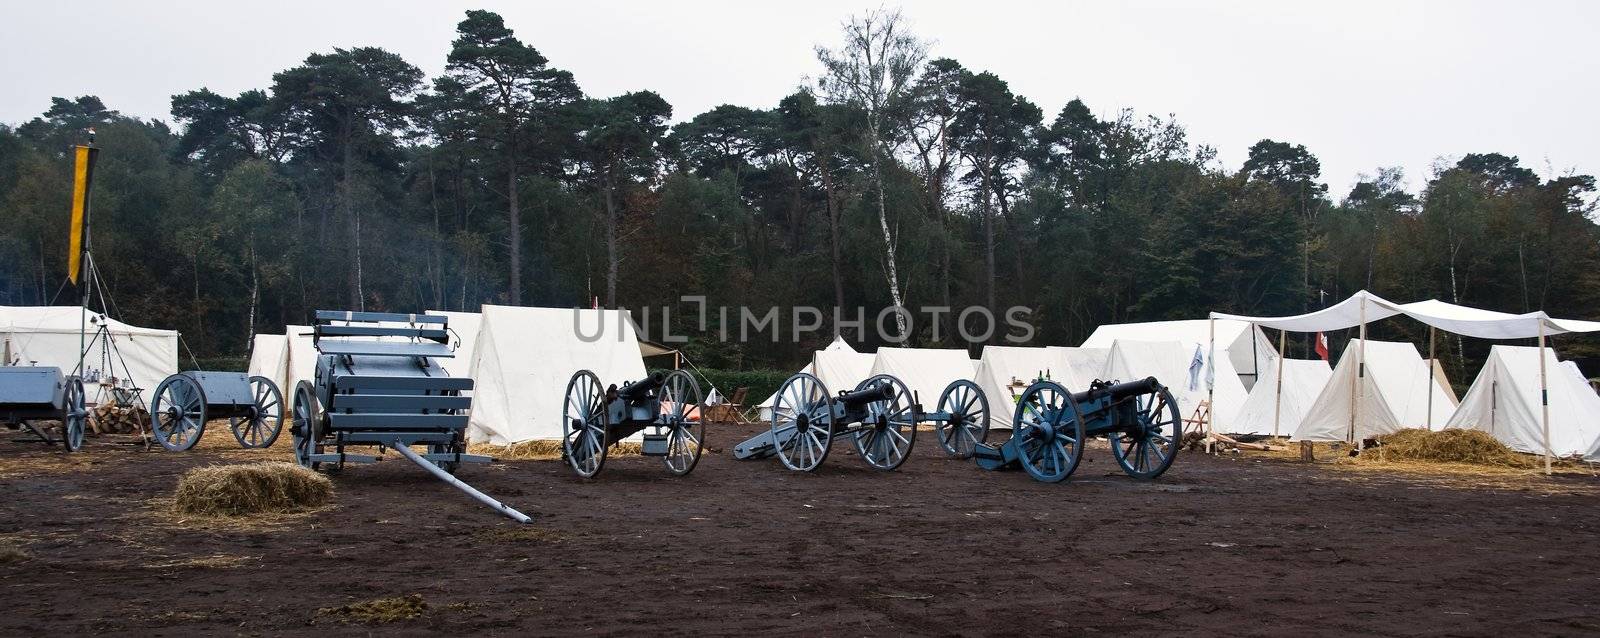 AUSTERLITZ, THE NETHERLANDS, OCTOBER 12, 2008 � History enthusiasts take part in the replay of the inspection of the troops by Louis Napol�on , king of Holland from 1806-1810. Camp before sunrise